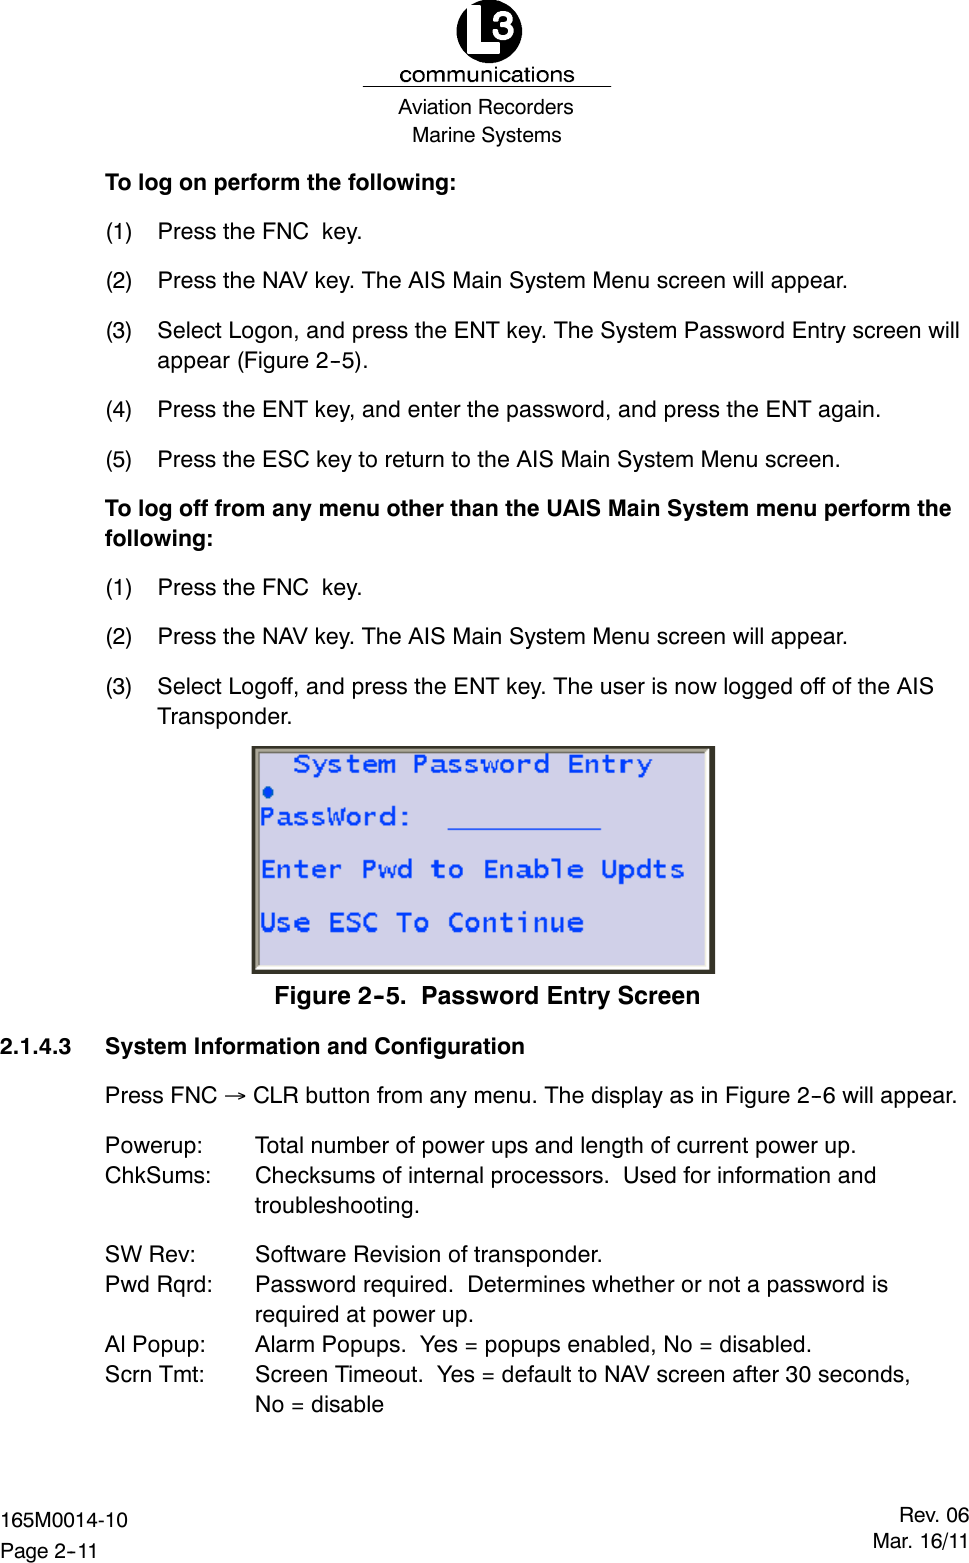 Marine SystemsAviation RecordersRev. 06Mar. 16/11165M0014-10Page 2--11To log on perform the following:(1) Press the FNC key.(2) Press the NAV key. The AIS Main System Menu screen will appear.(3) Select Logon, and press the ENT key. The System Password Entry screen willappear (Figure 2--5).(4) Press the ENT key, and enter the password, and press the ENT again.(5) Press the ESC key to return to the AIS Main System Menu screen.To log off from any menu other than the UAIS Main System menu perform thefollowing:(1) Press the FNC key.(2) Press the NAV key. The AIS Main System Menu screen will appear.(3) Select Logoff, and press the ENT key. The user is now logged off of the AISTransponder.Figure 2--5. Password Entry Screen2.1.4.3 System Information and ConfigurationPress FNC CLR button from any menu. The display as in Figure 2--6 will appear.Powerup: Total number of power ups and length of current power up.ChkSums: Checksums of internal processors. Used for information andtroubleshooting.SW Rev: Software Revision of transponder.Pwd Rqrd: Password required. Determines whether or not a password isrequired at power up.Al Popup: Alarm Popups. Yes = popups enabled, No = disabled.Scrn Tmt: Screen Timeout. Yes = default to NAV screen after 30 seconds,No = disable